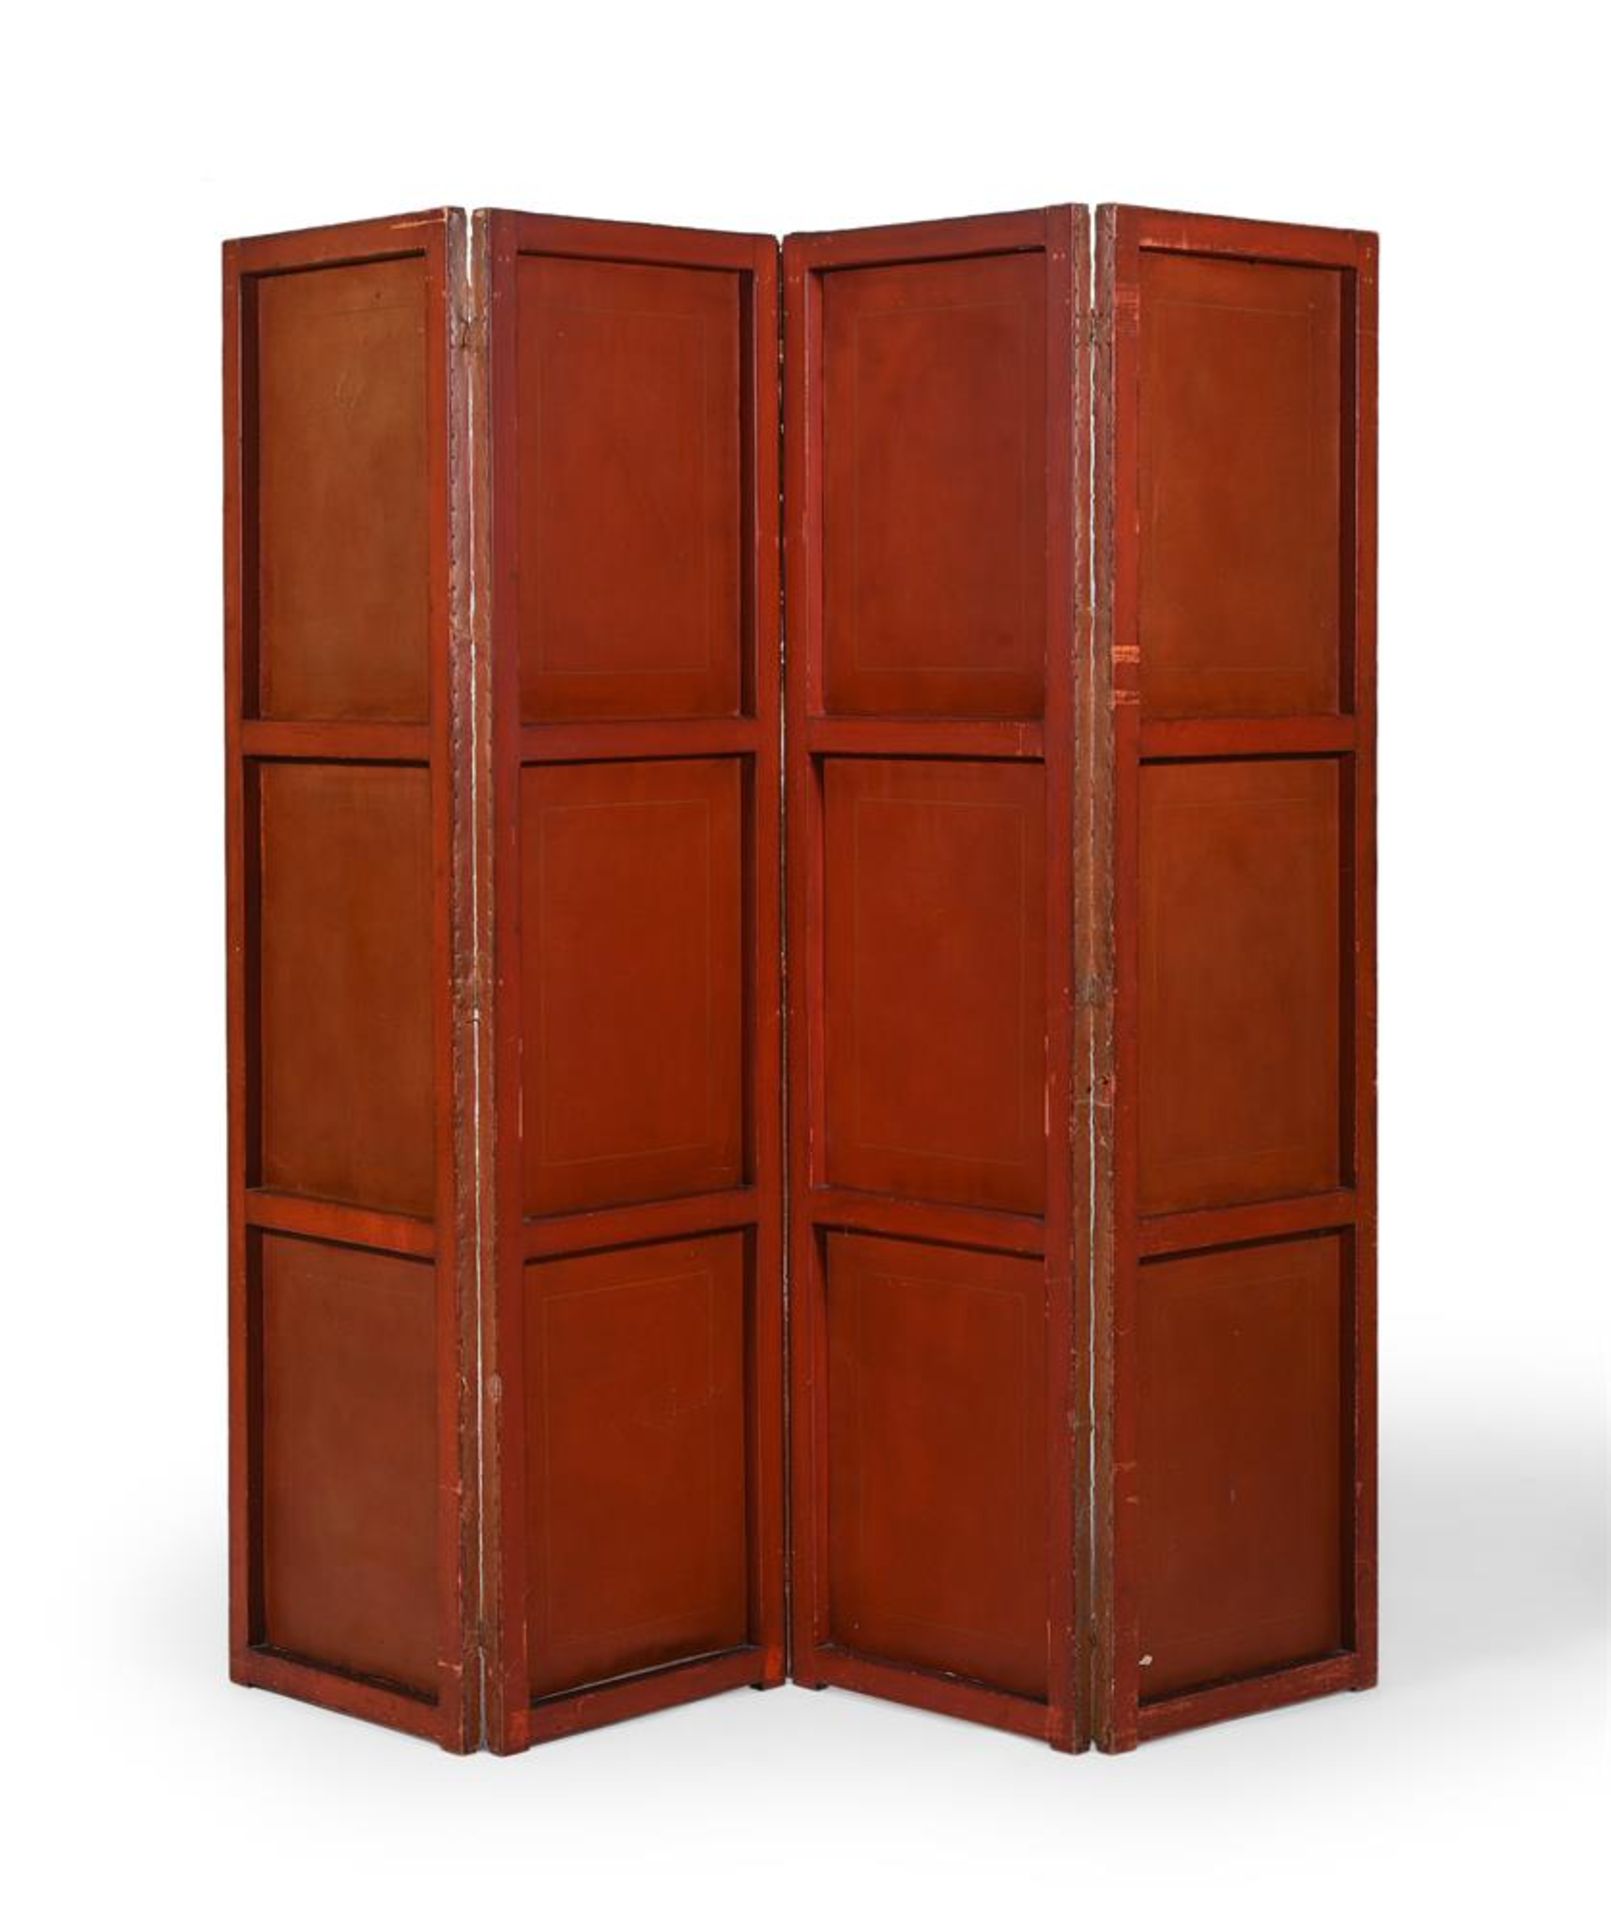 A SCARLET LACQUER AND GILT CHINOISERIE DECORATED FOUR-FOLD ROOM SCREEN - Image 4 of 6